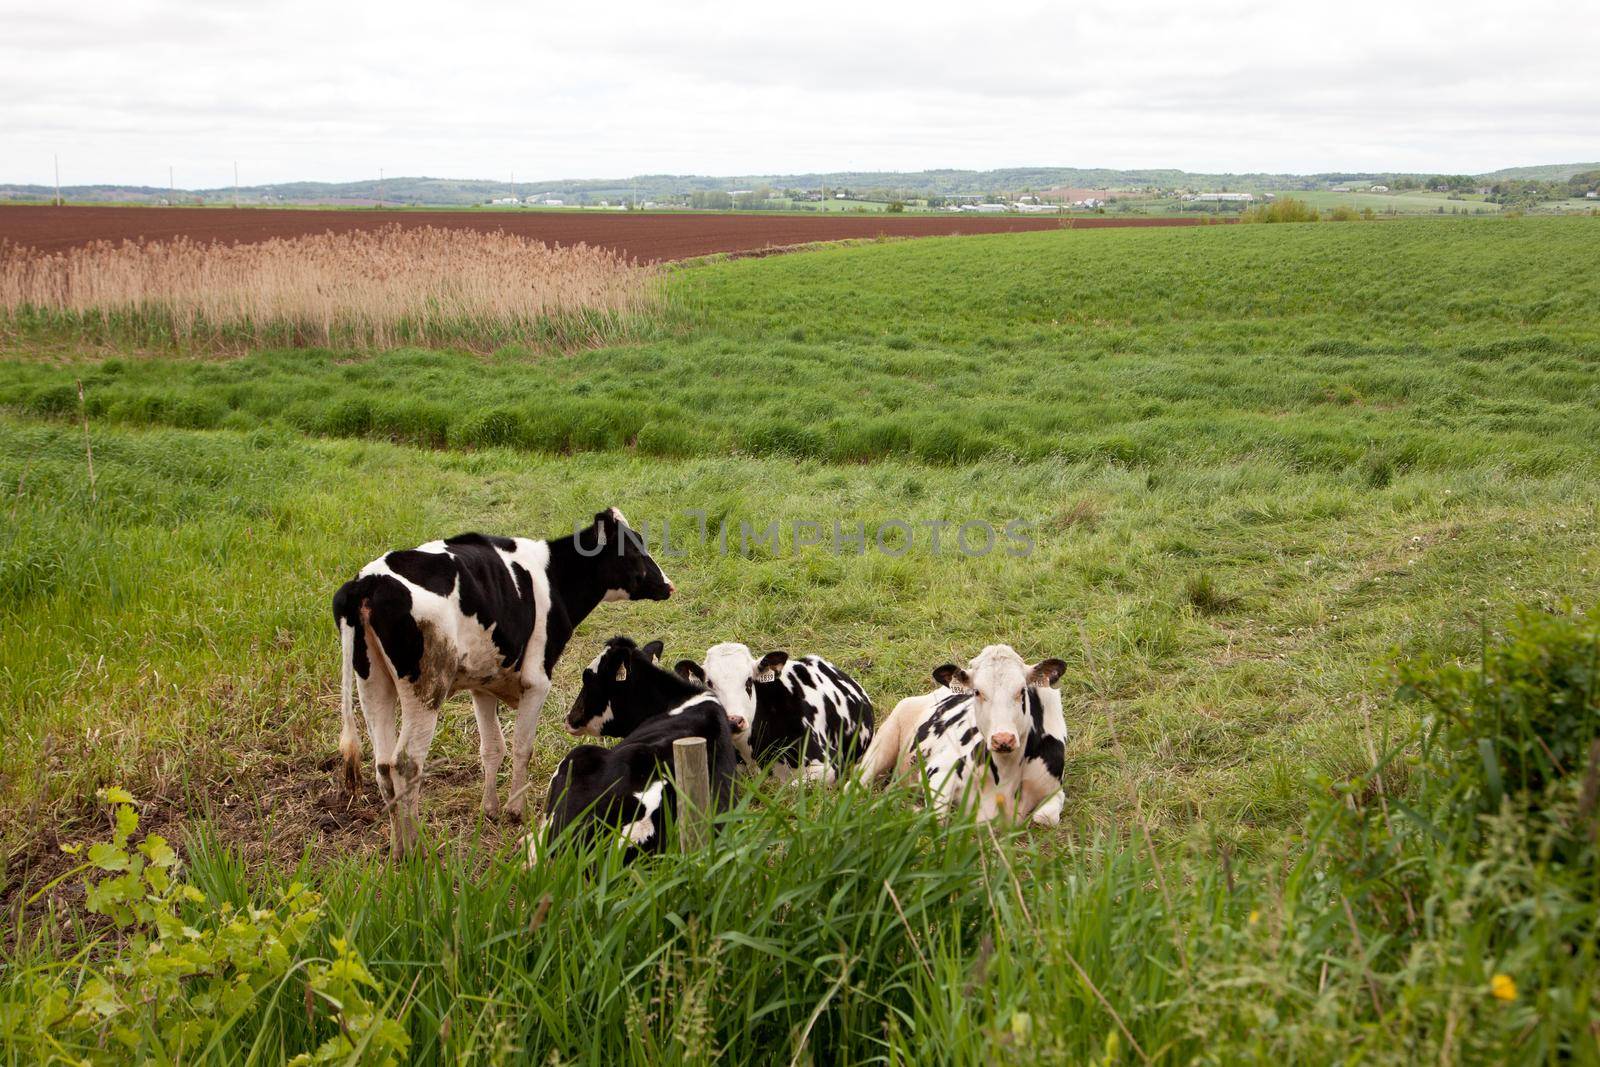 Black and white cows stand and lay down in the foreground of a long agricultural field 